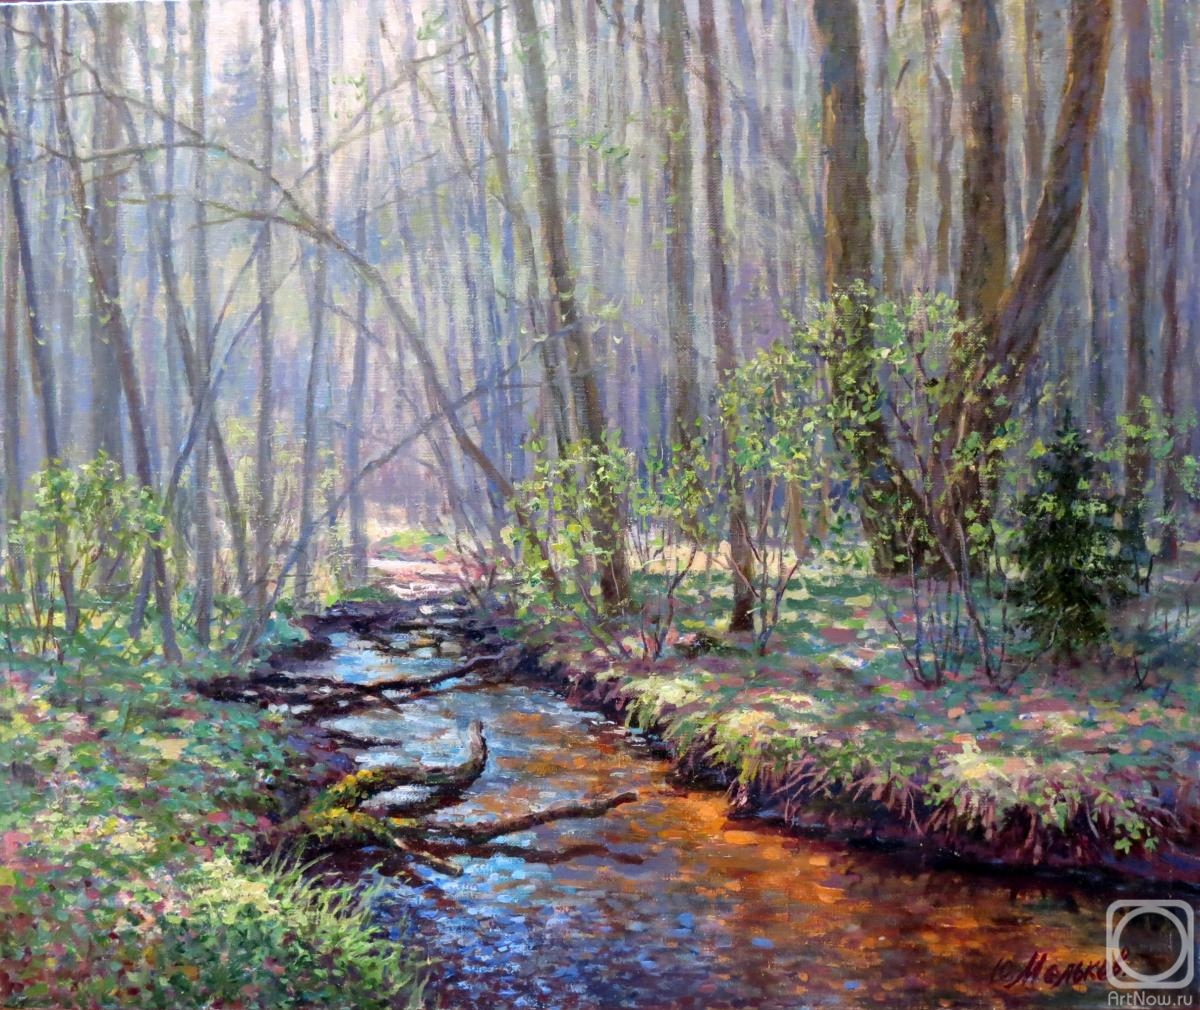 Melikov Yury. In the may forest